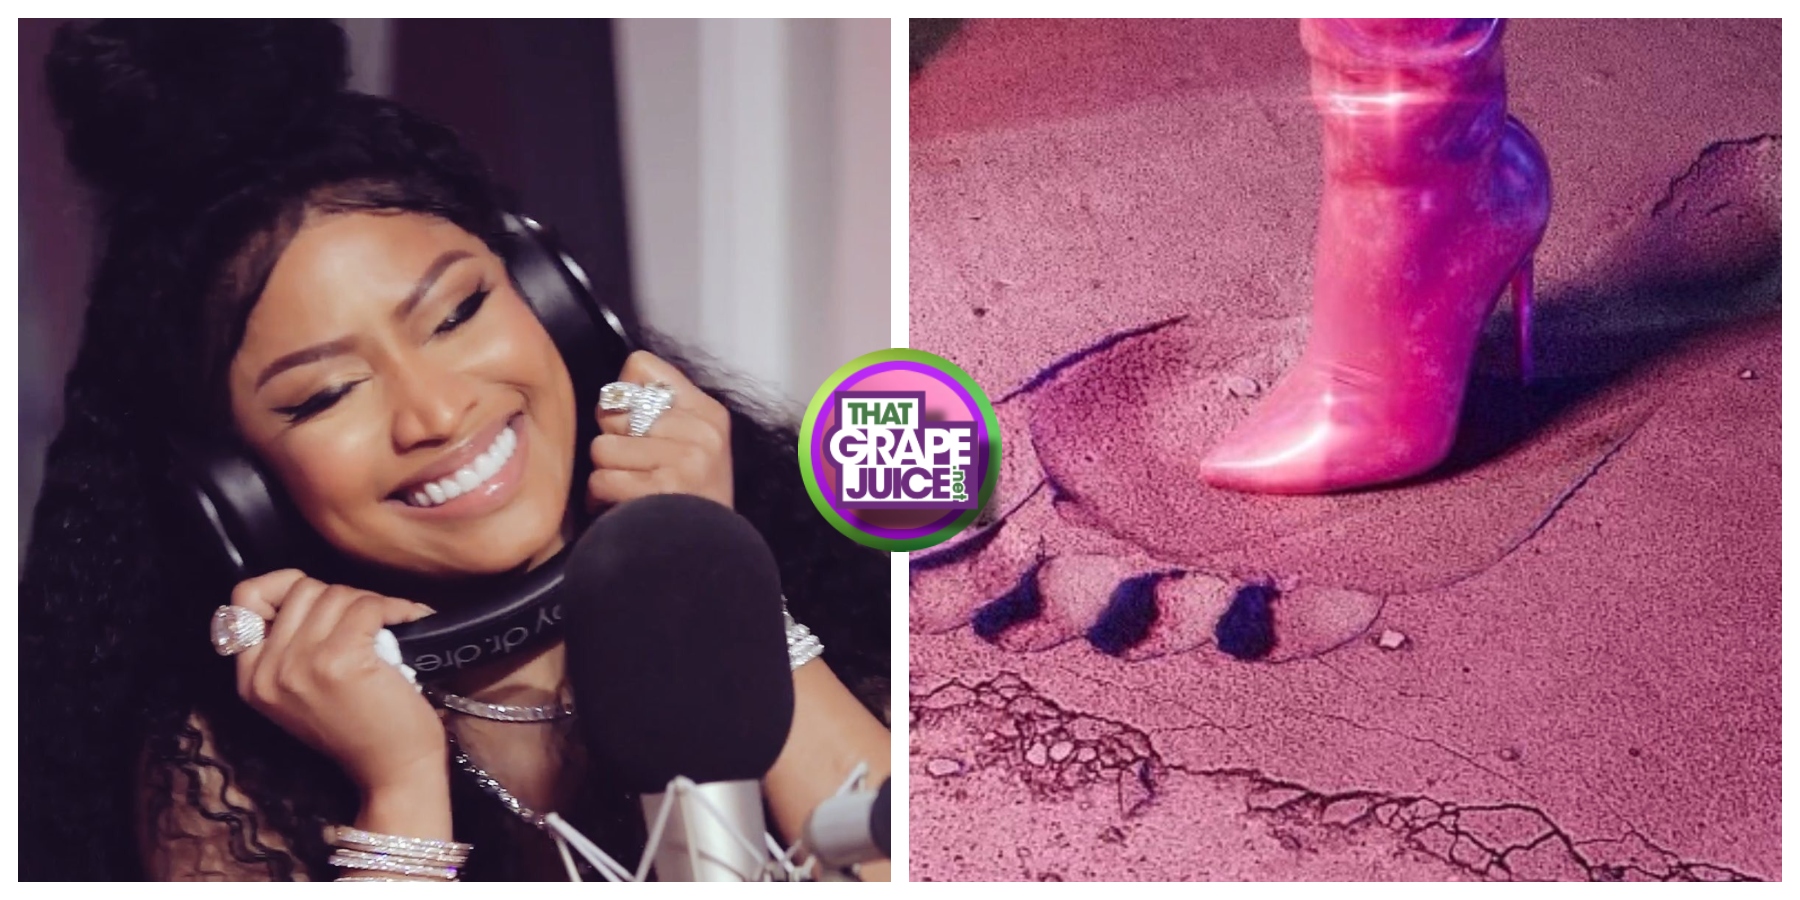 Nicki Minaj’s ‘Big Foot’ Quietly Marked Her Milestone 75th Hot 100 Top 40 Hit – The Most of Any Woman of Color